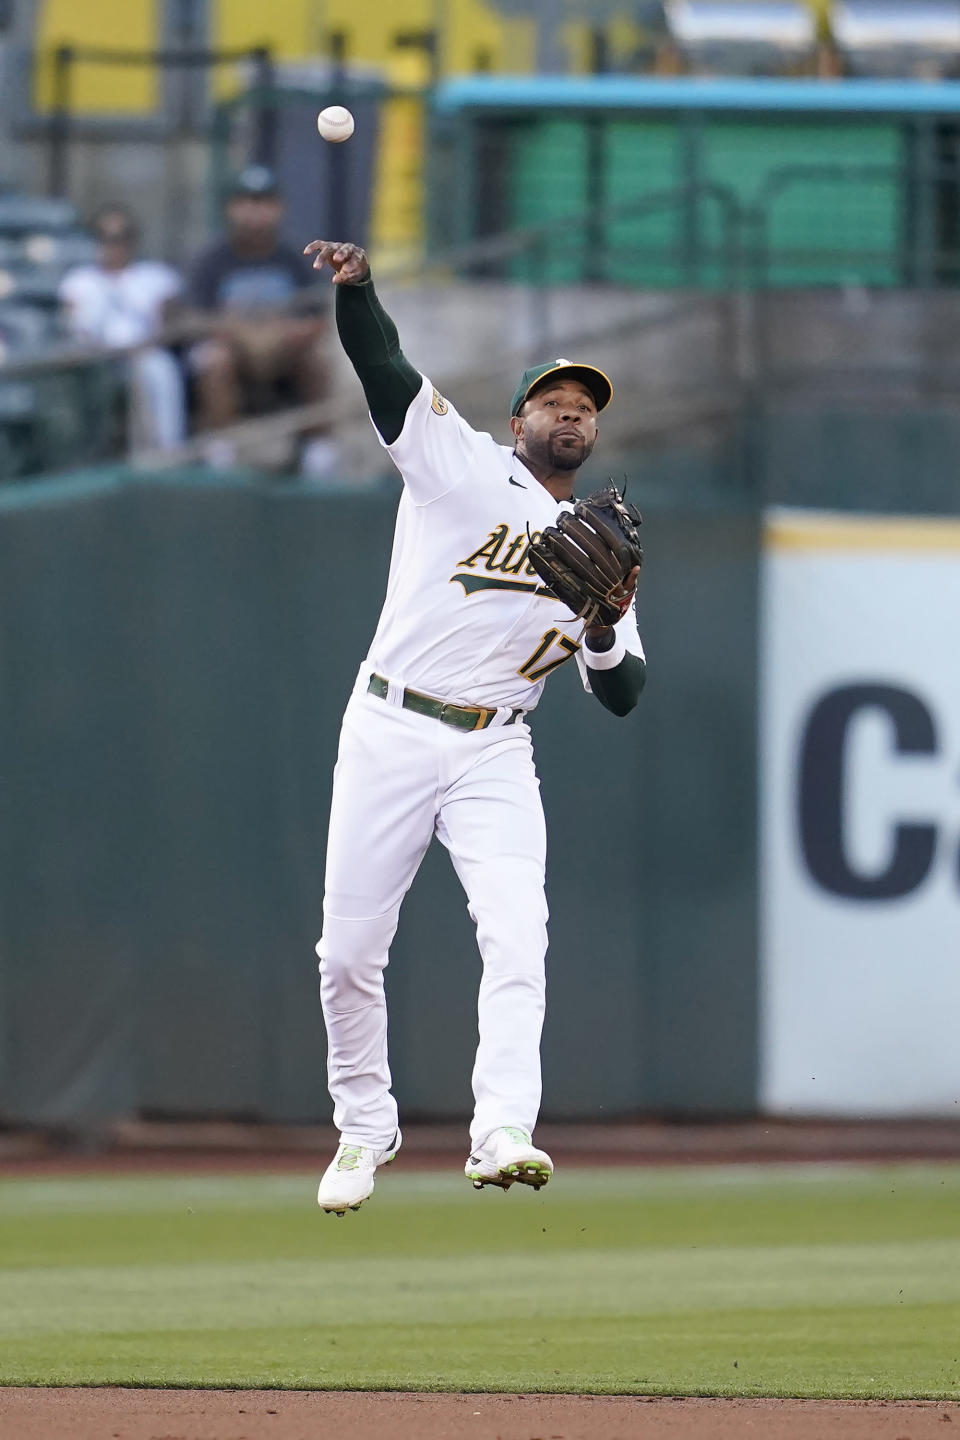 Oakland Athletics shortstop Elvis Andrus throws out Los Angeles Angels' Taylor Ward at first base during the third inning of a baseball game in Oakland, Calif., Monday, Aug. 8, 2022. (AP Photo/Jeff Chiu)